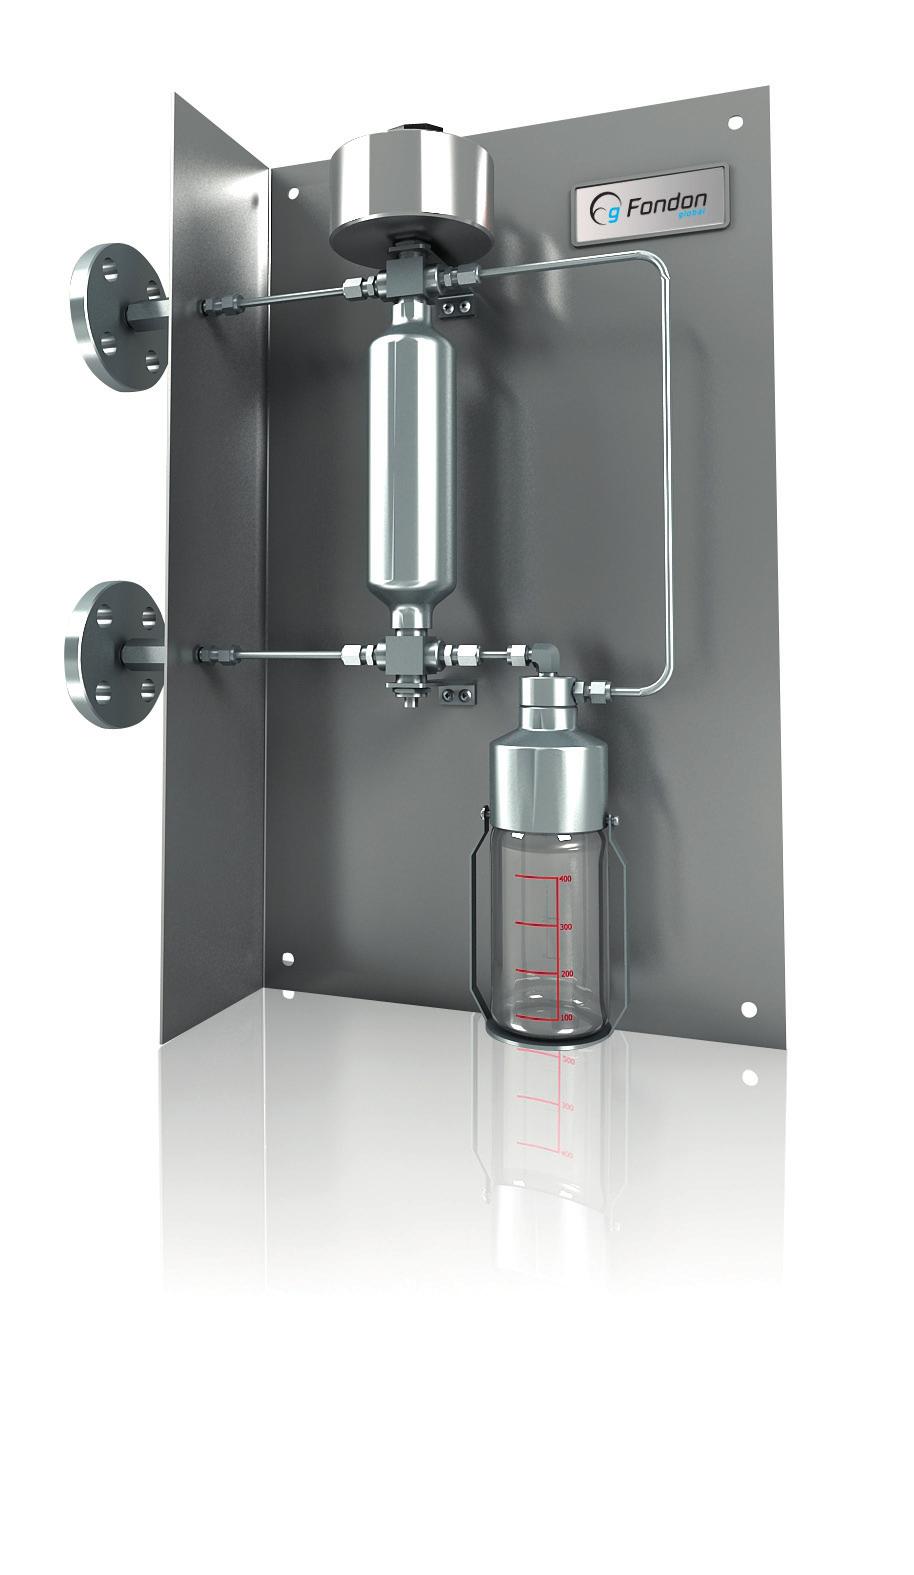 Sampling systems for liquids FV 01 Model Through a single handle, this equipment enables the collection of process samples in a manner which is simple for the operator.